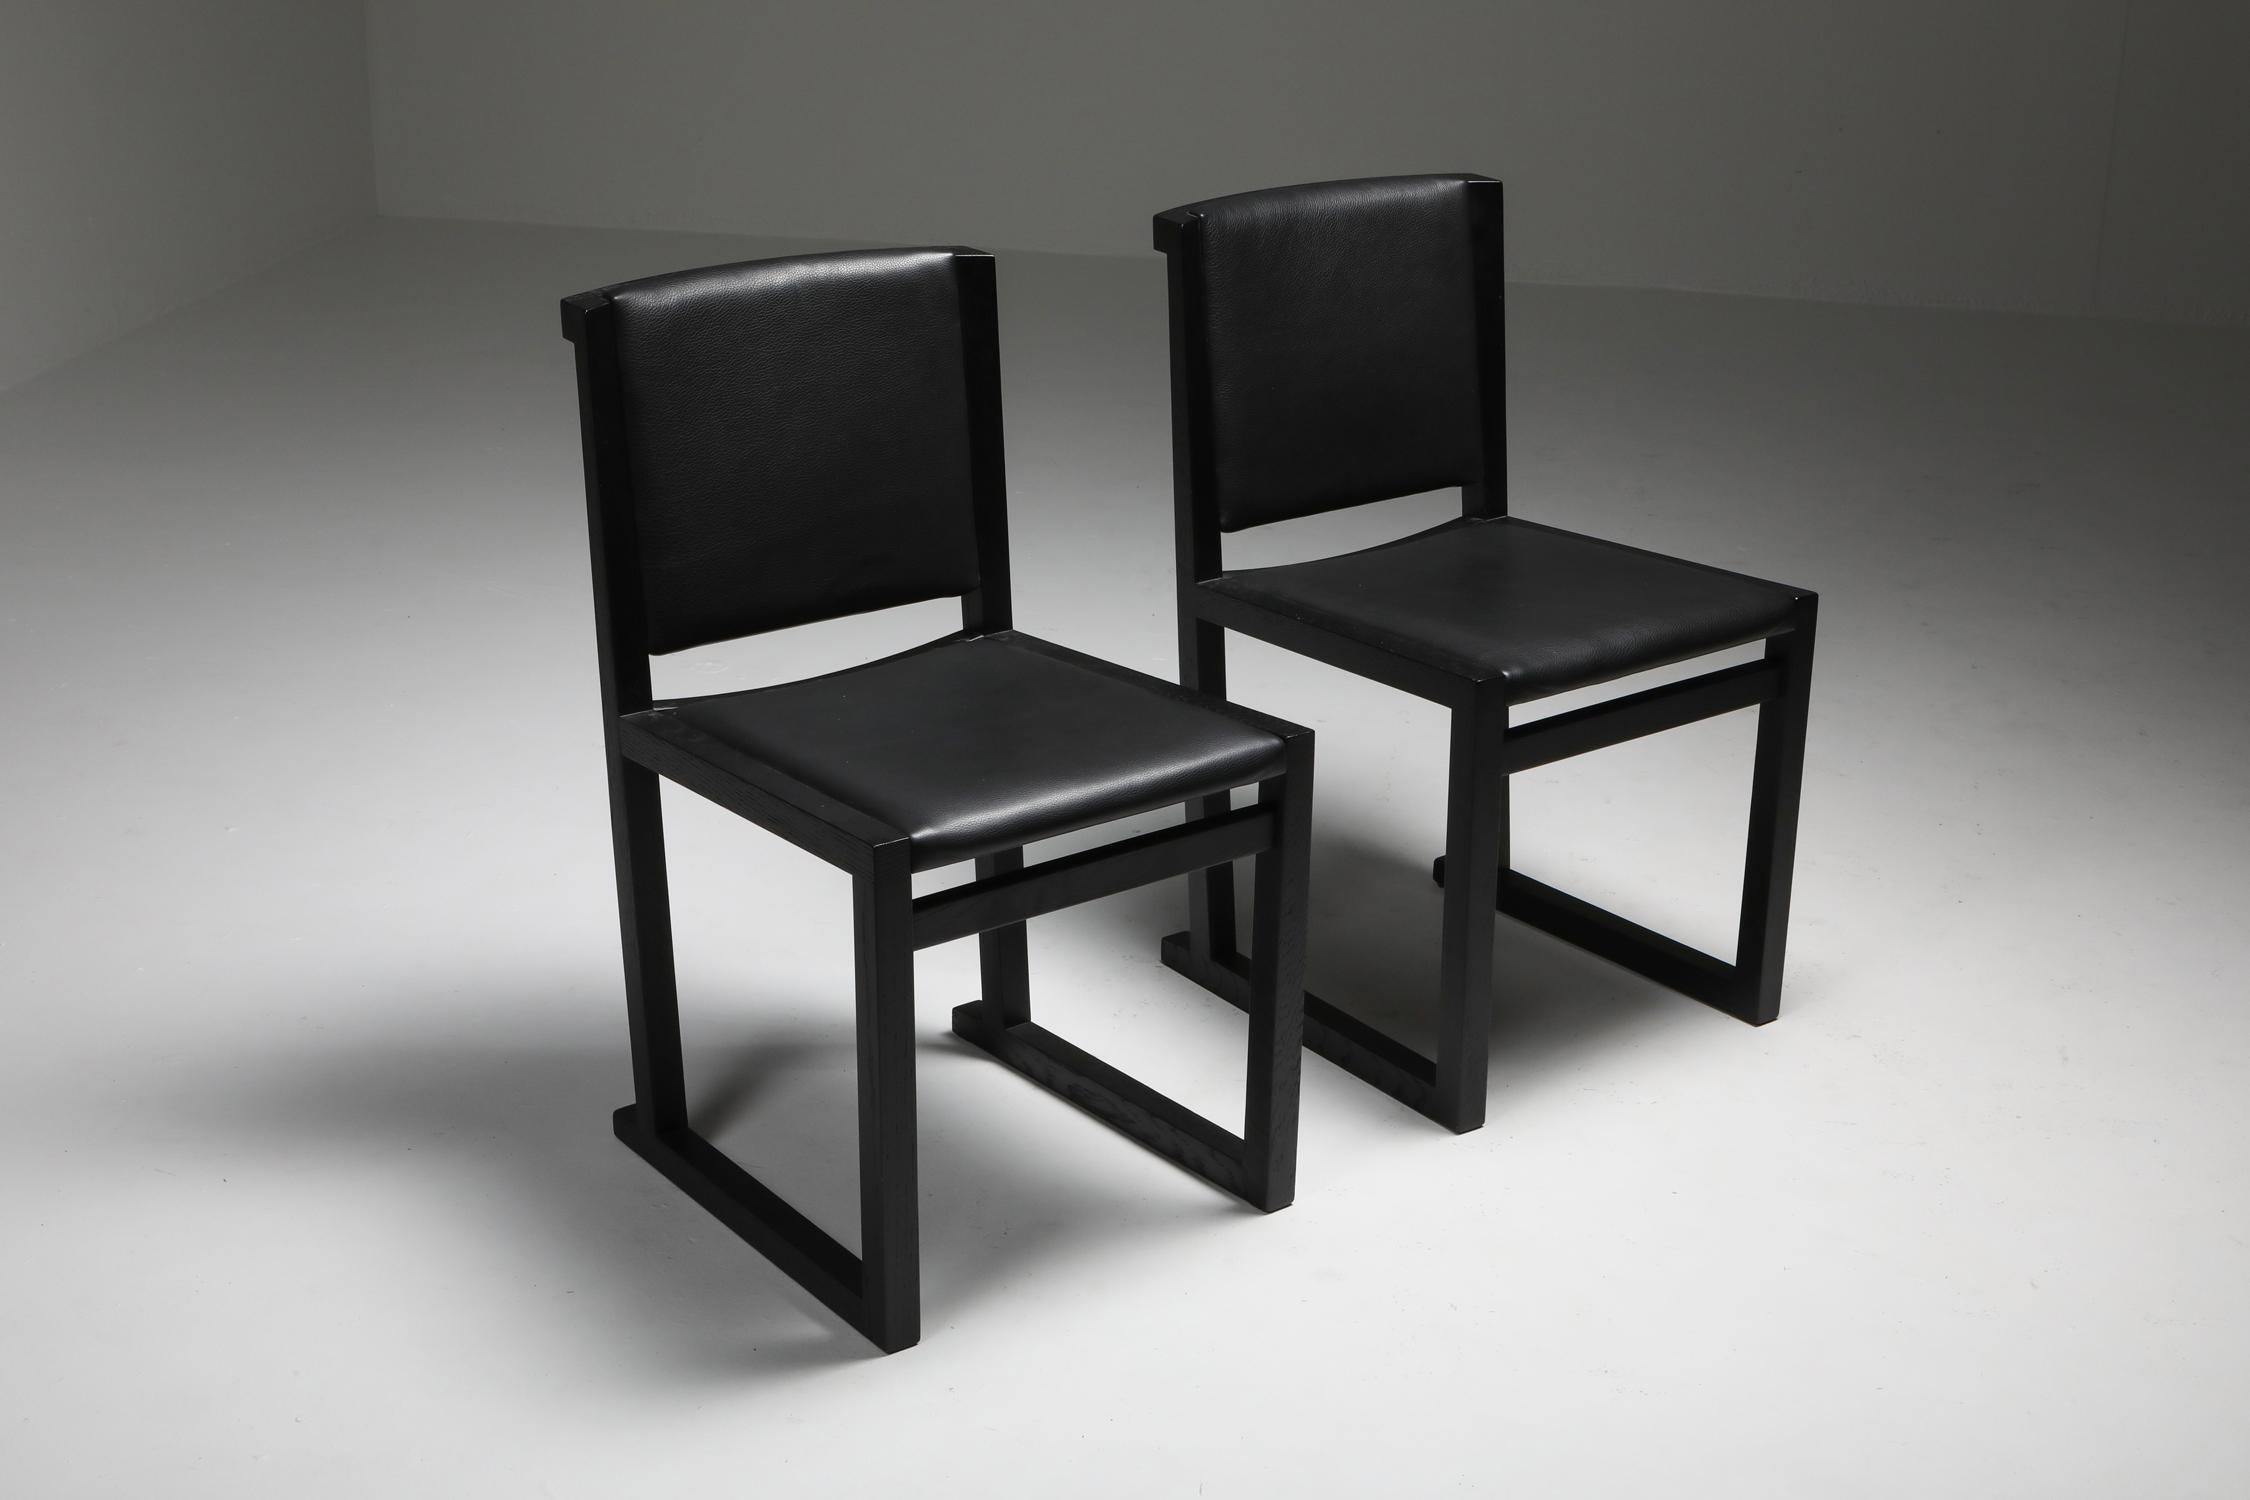 Ebonized Oak Dining Chairs by Antonio Citterio for Maxalto, 2000s In Excellent Condition For Sale In Antwerp, BE